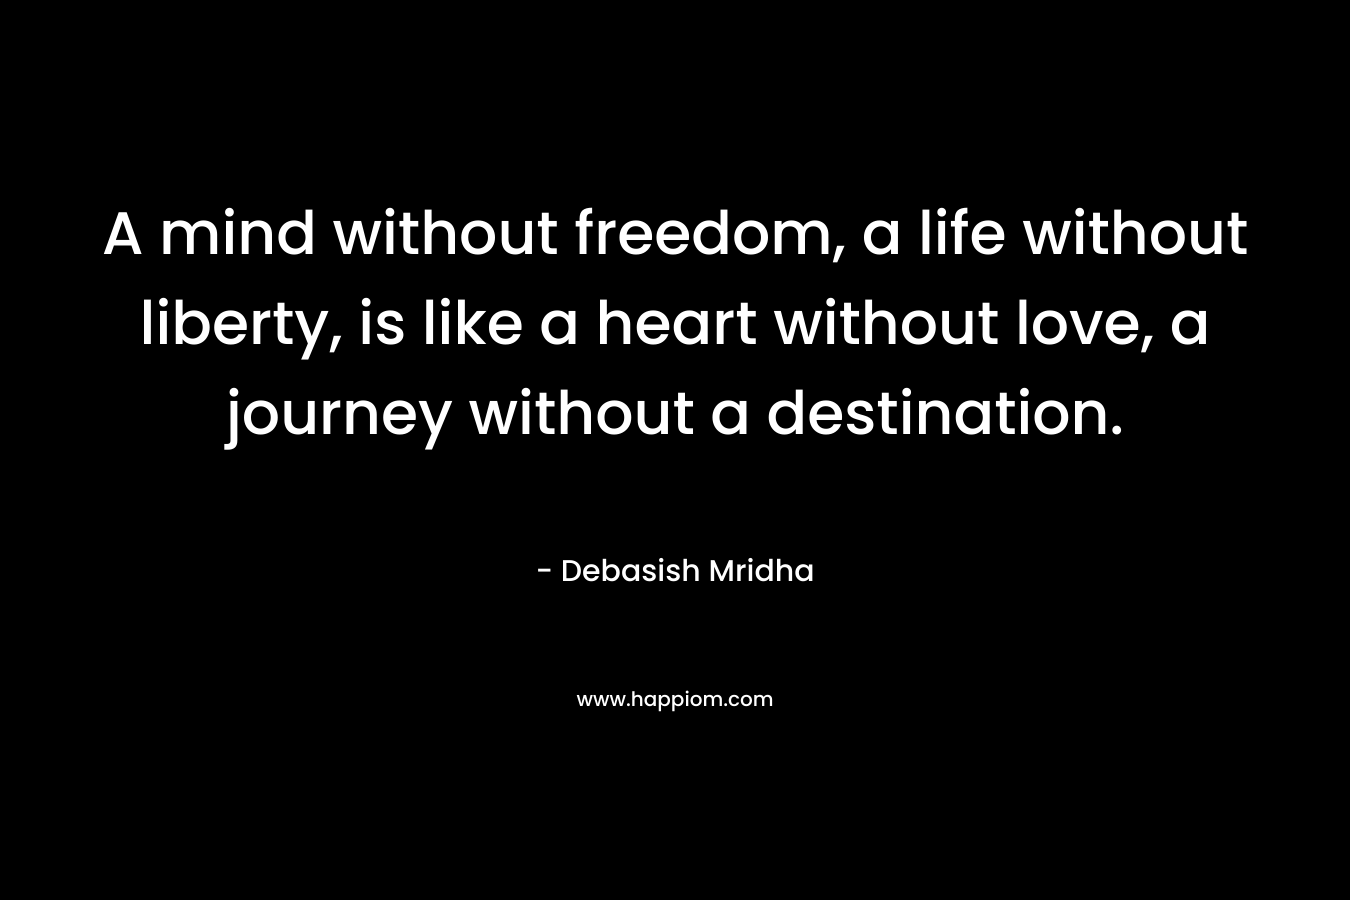 A mind without freedom, a life without liberty, is like a heart without love, a journey without a destination.